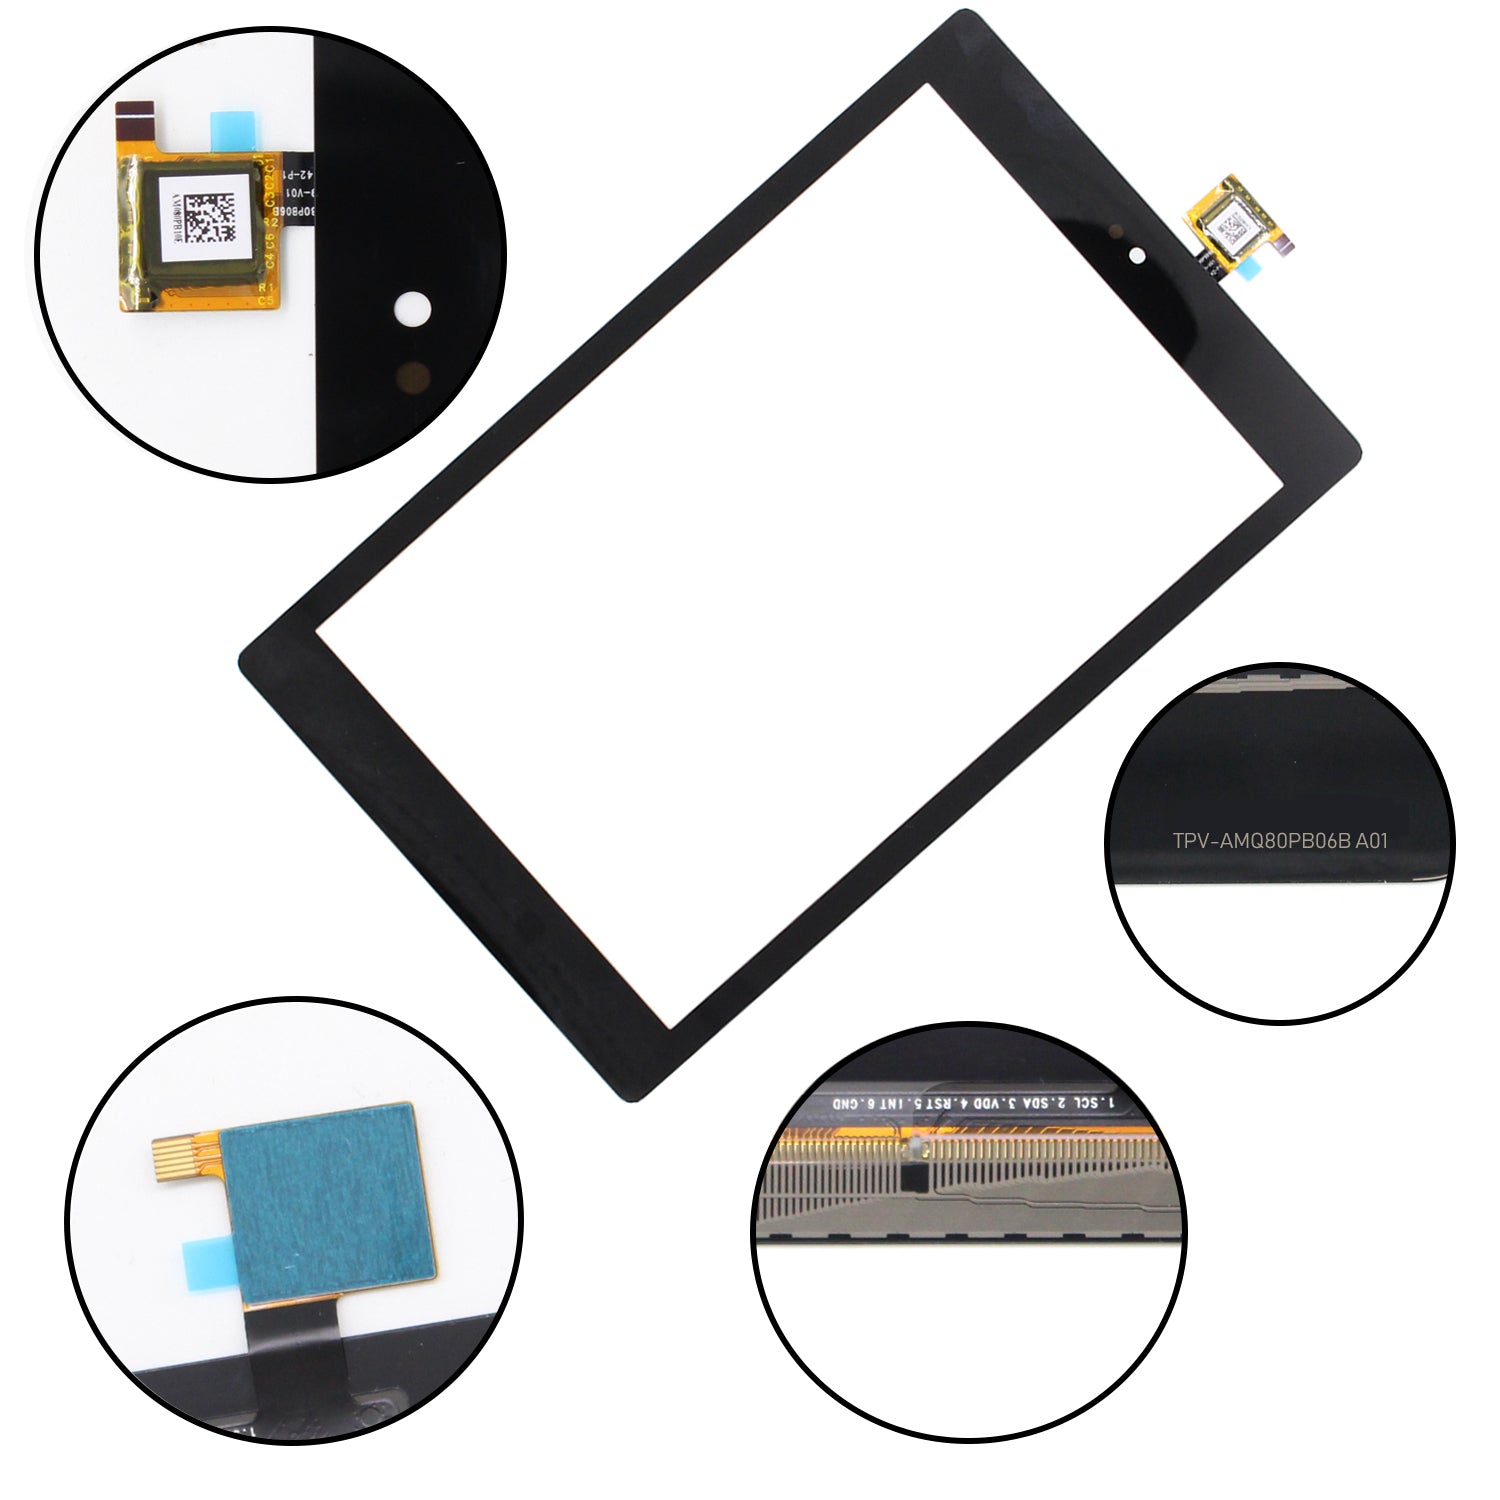 S-Union New Replacement Touch Screen Digitizer for Amazon Kindle Fire HD8 HD 8 8th Gen 2018 L5S83A 8 Inch（no LCD）